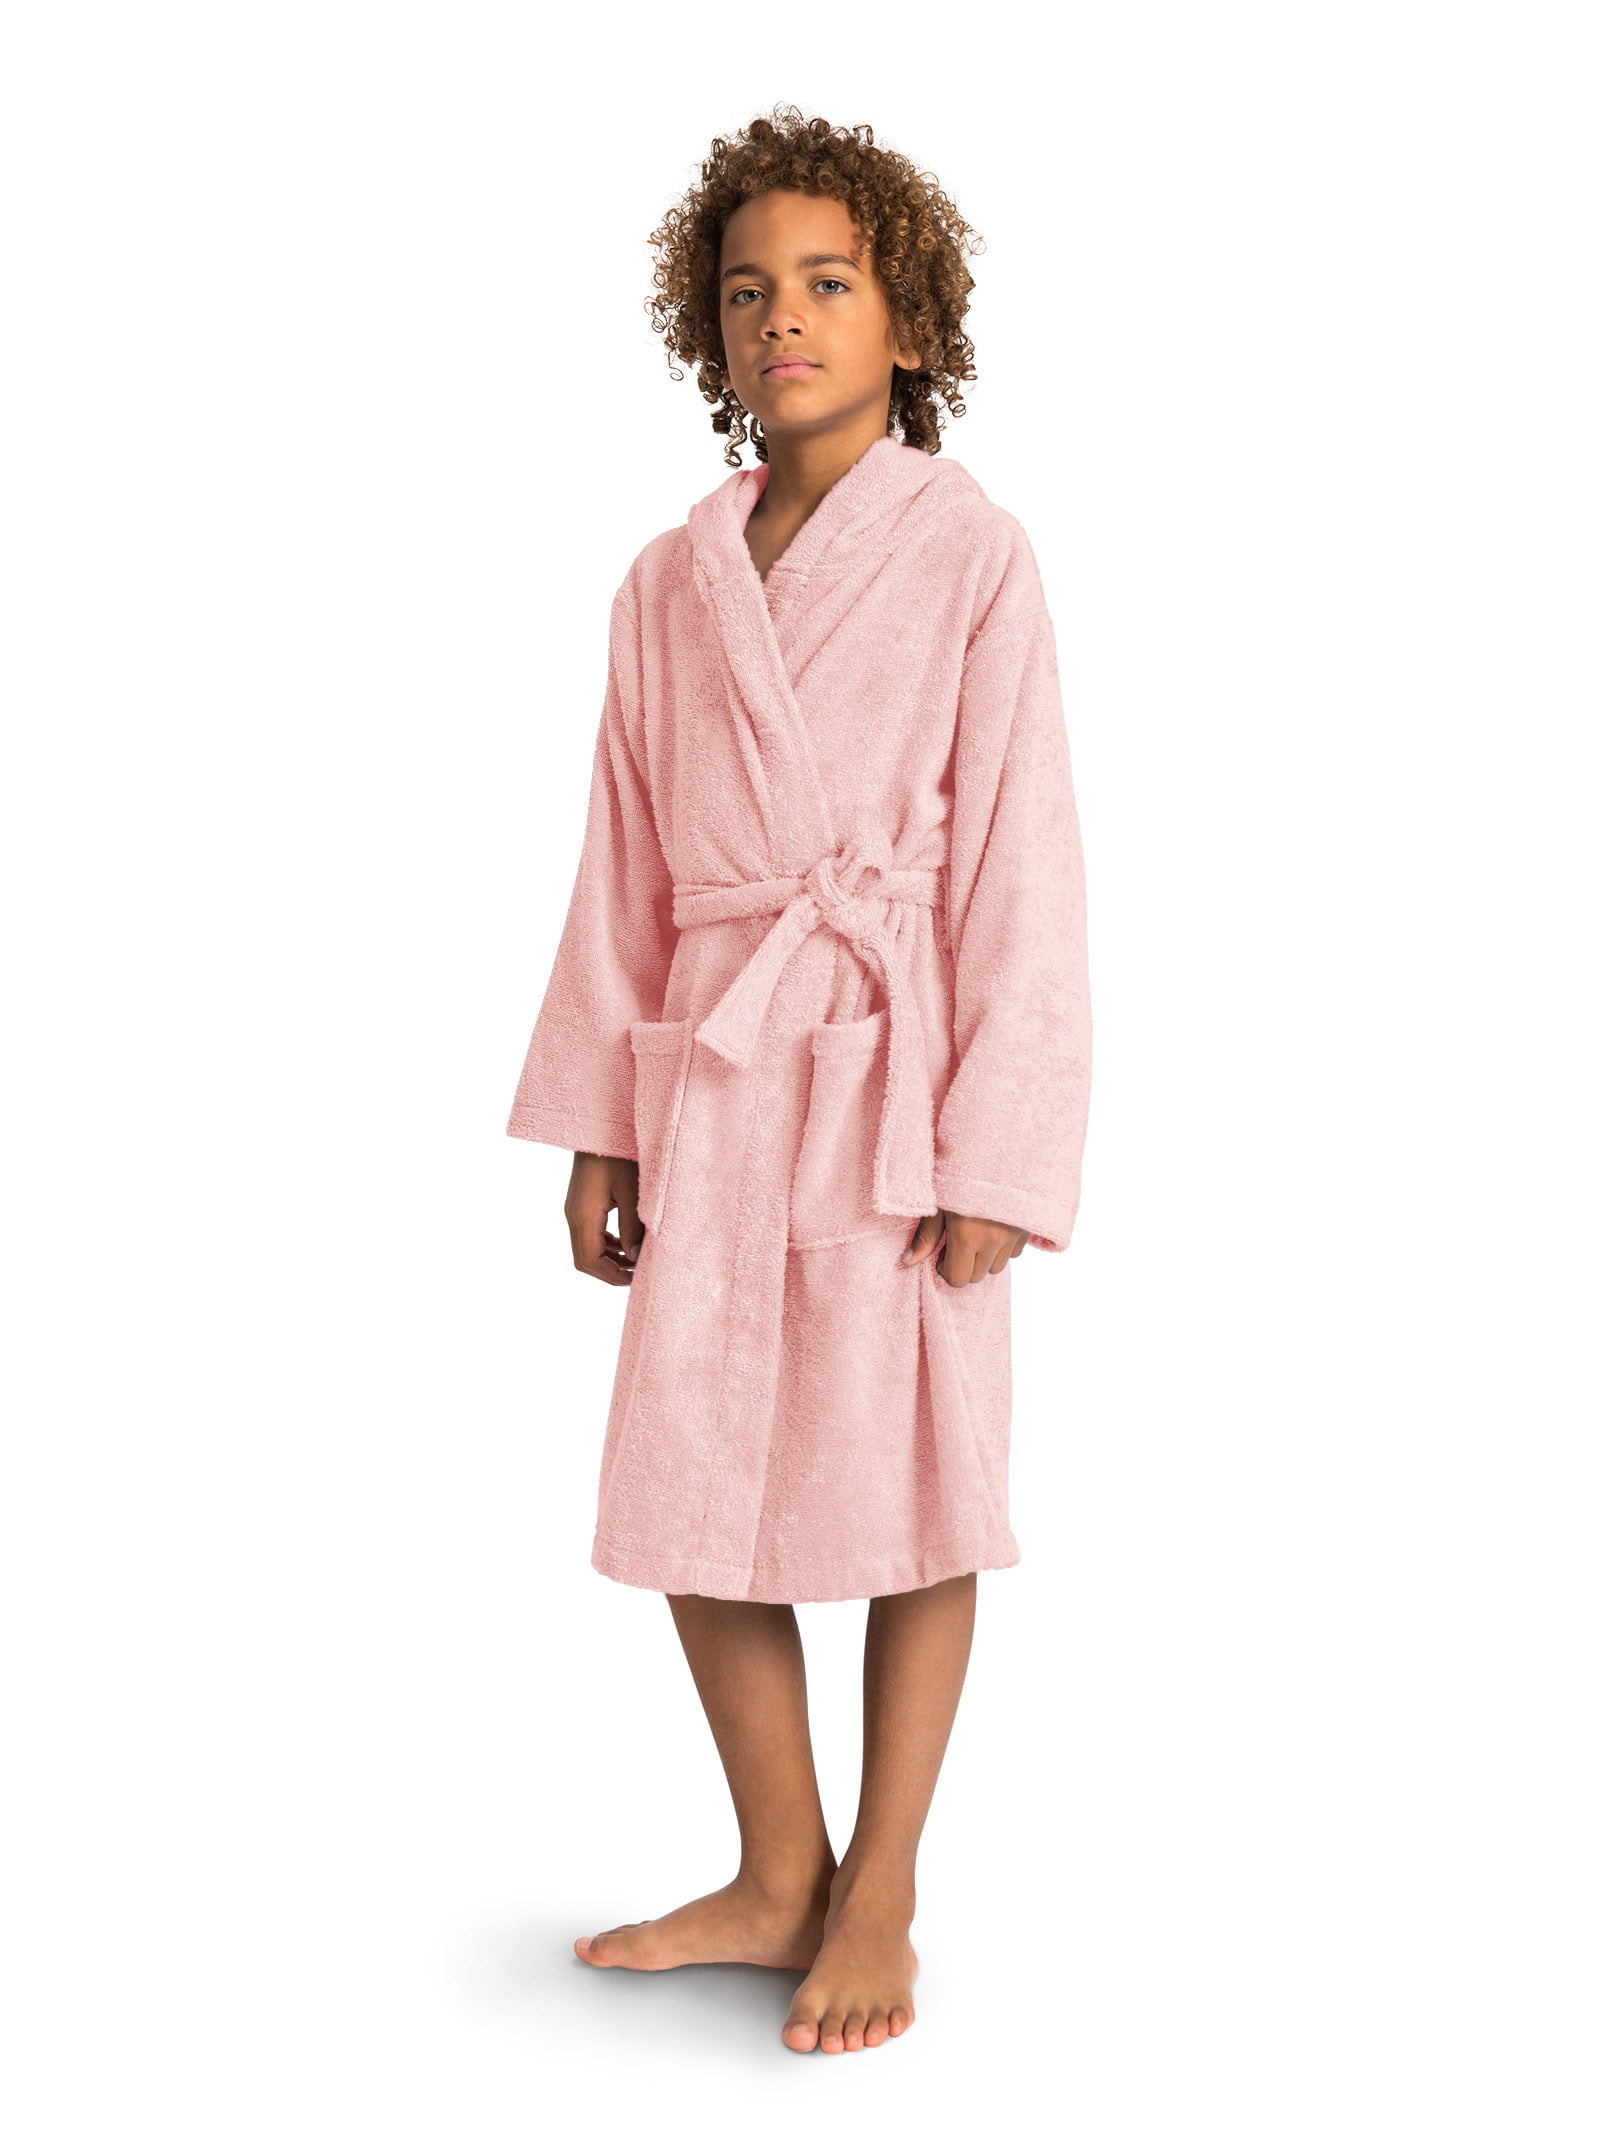 bob dod recommends bath robes for teens pic